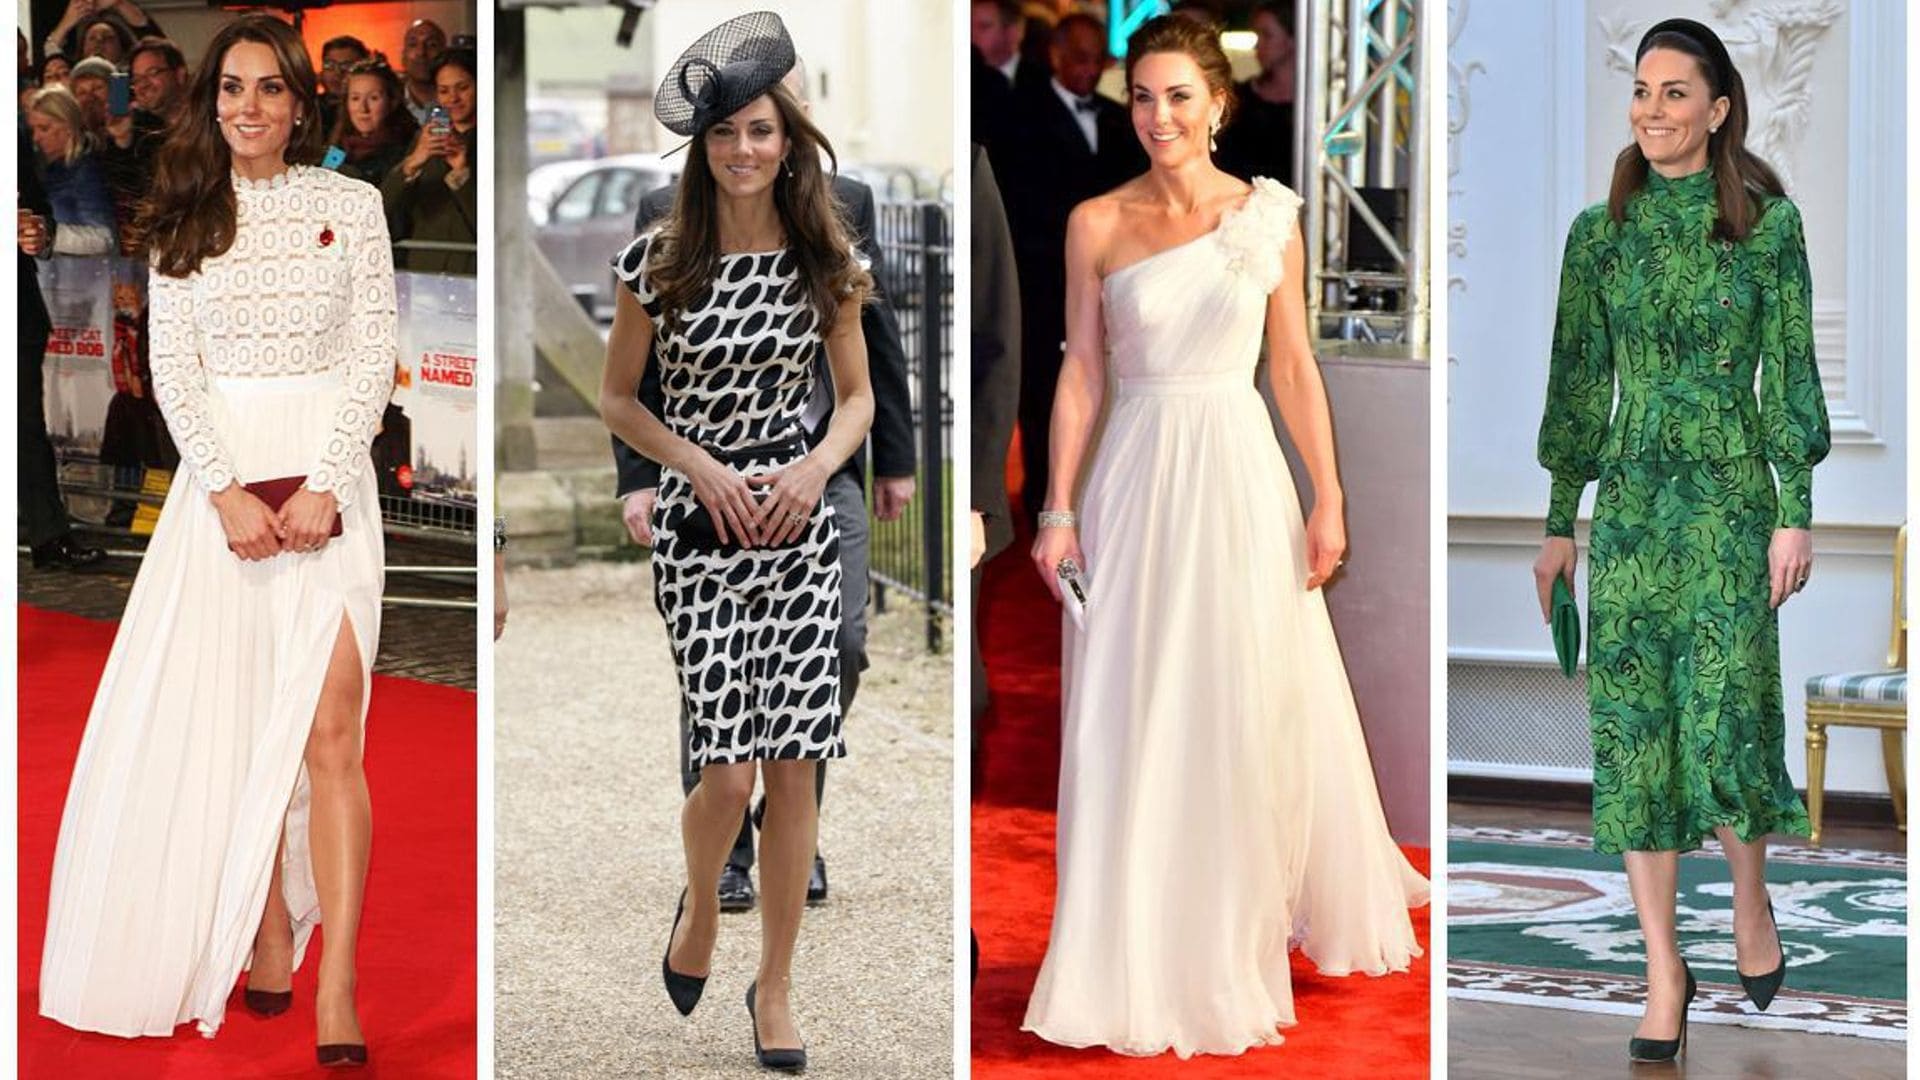 Kate Middleton’s style evolution, from royal bride to future Queen